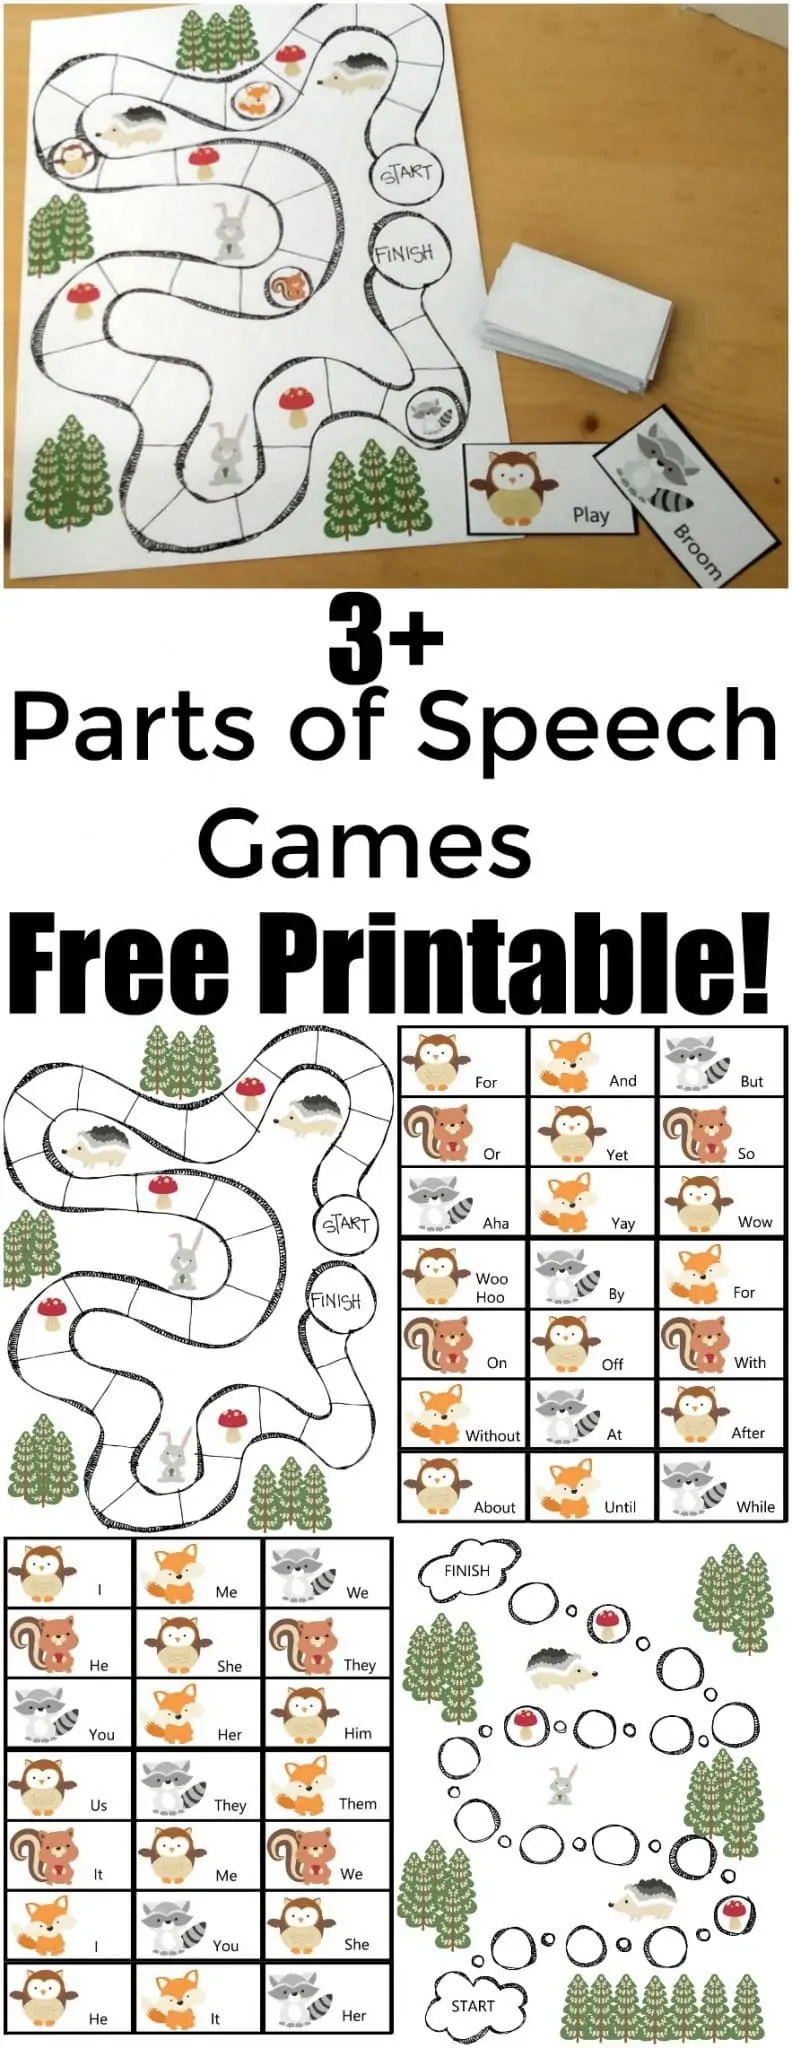 Parts-of-Speech-Game-More-than-3-Parts-of-speech-games-in-this-Free-Printable-pack